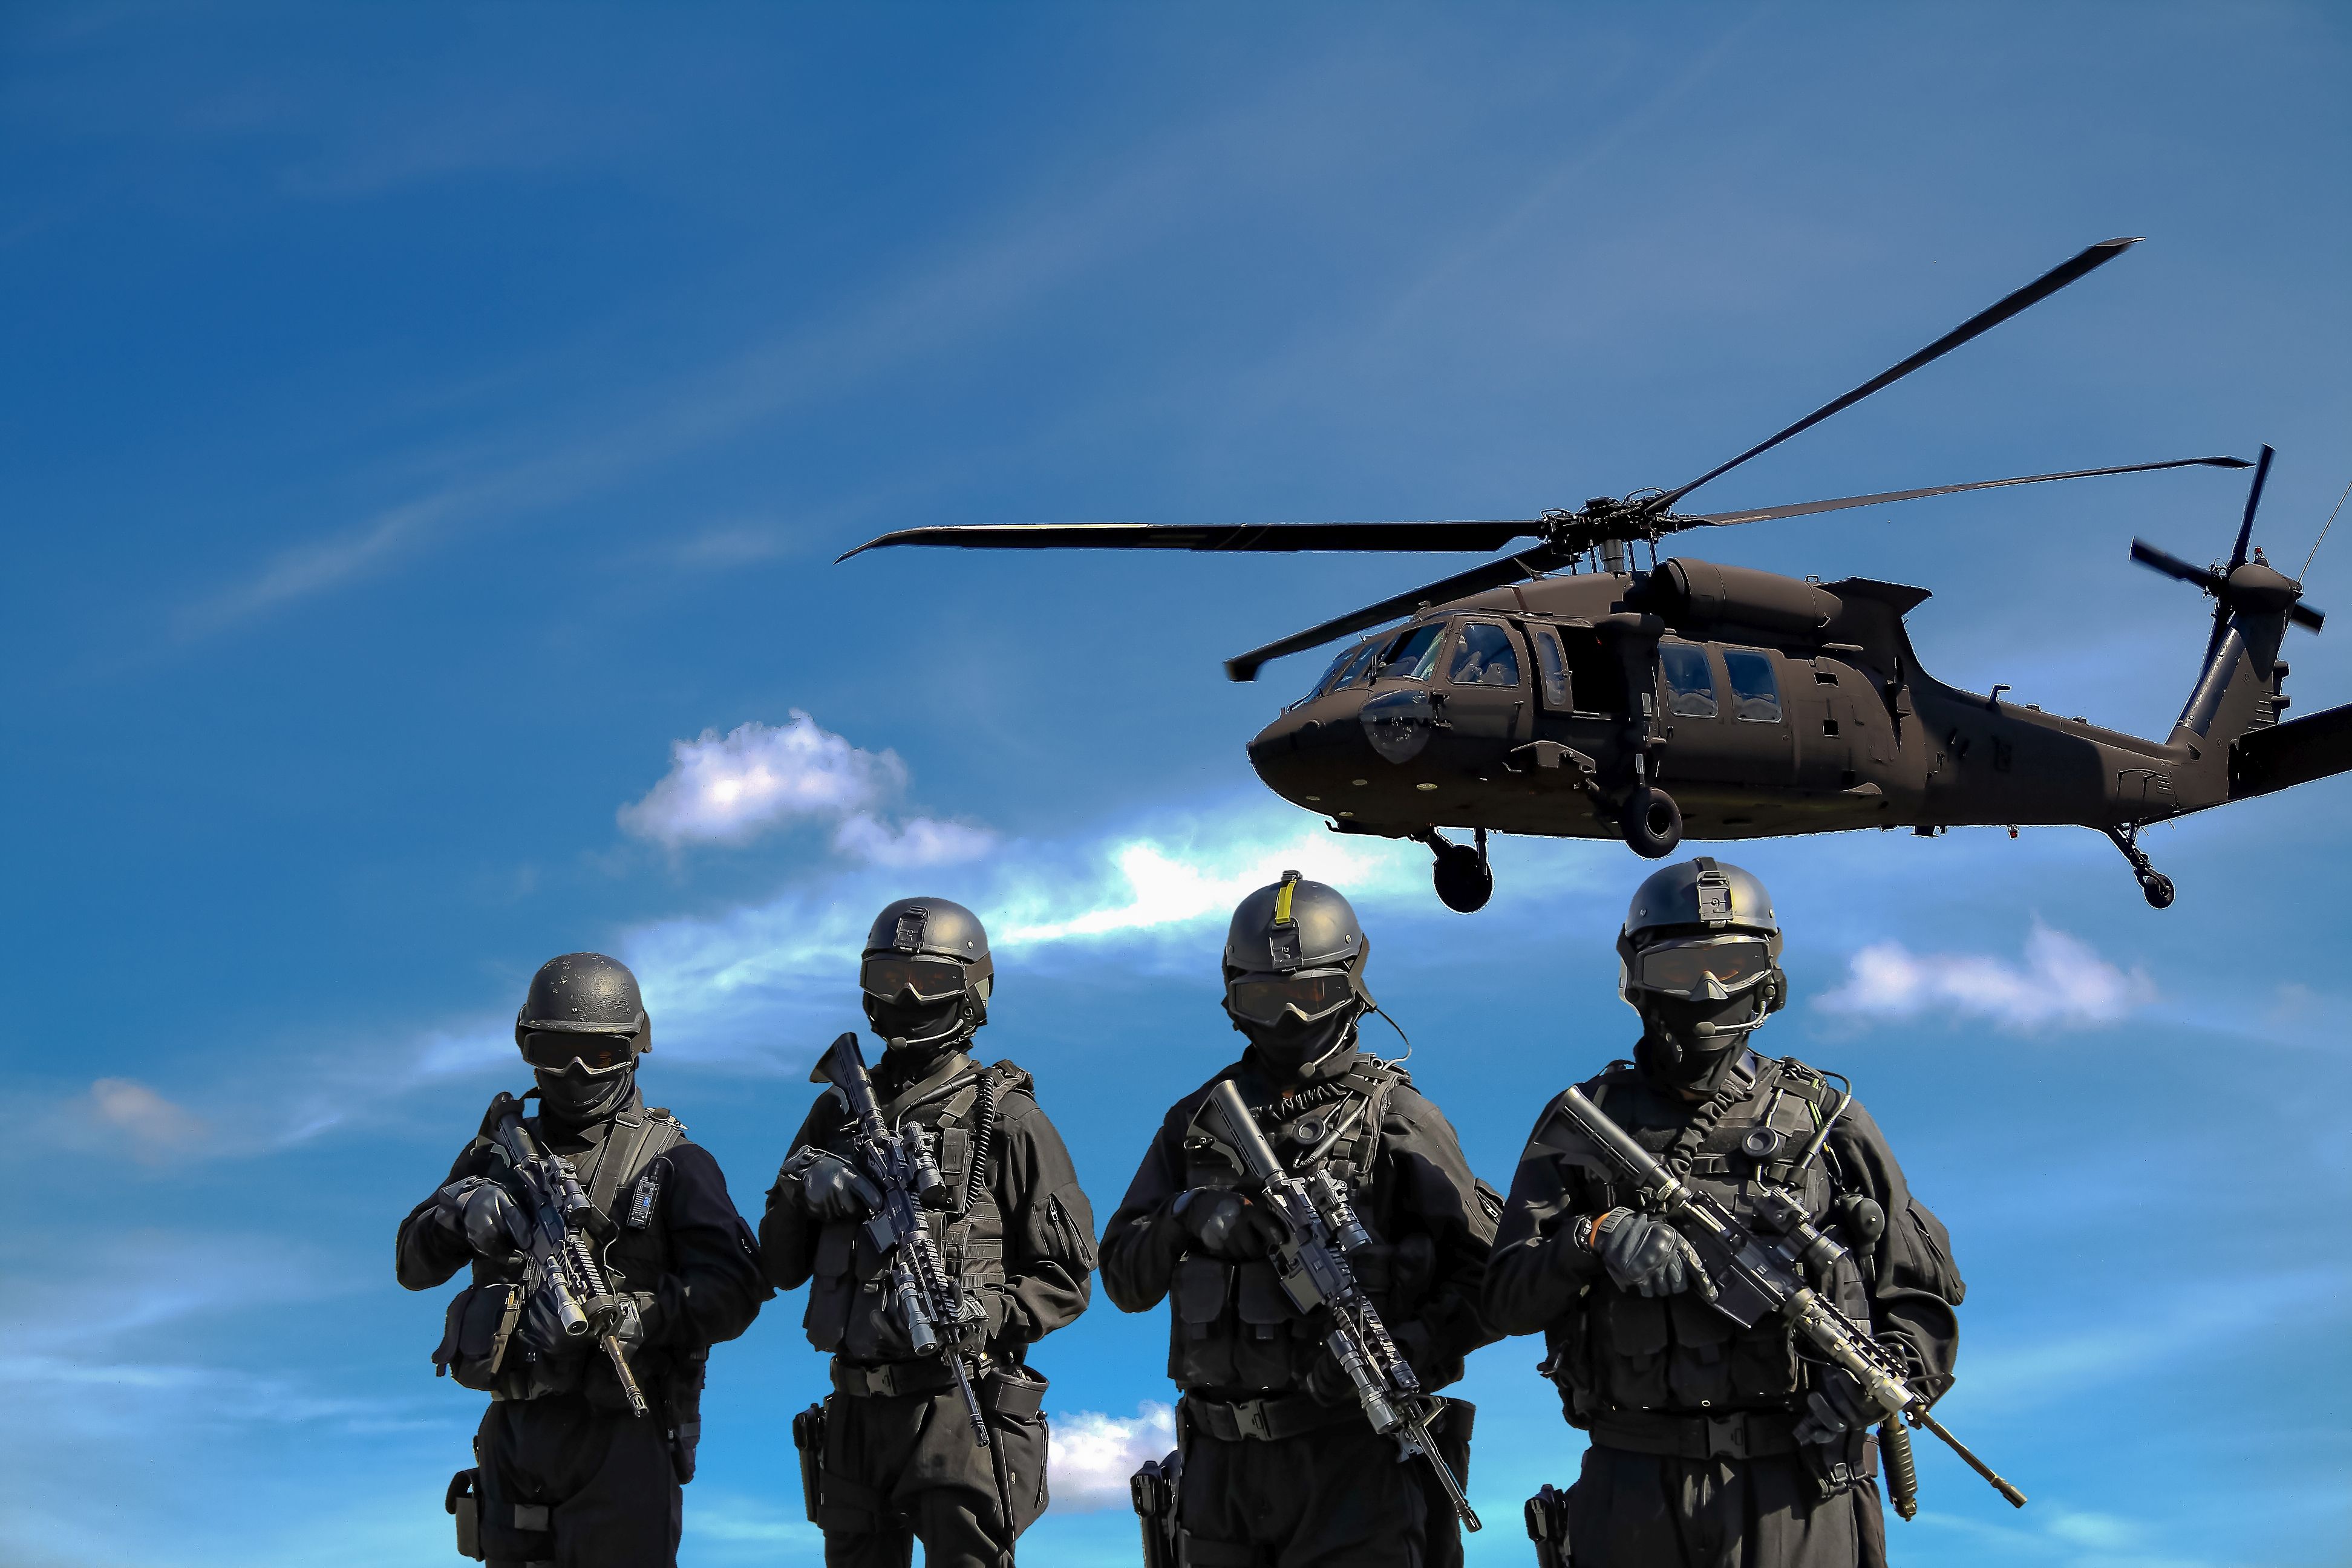 Four Soldiers Carrying Rifles Near Helicopter Under Blue Sky · Free